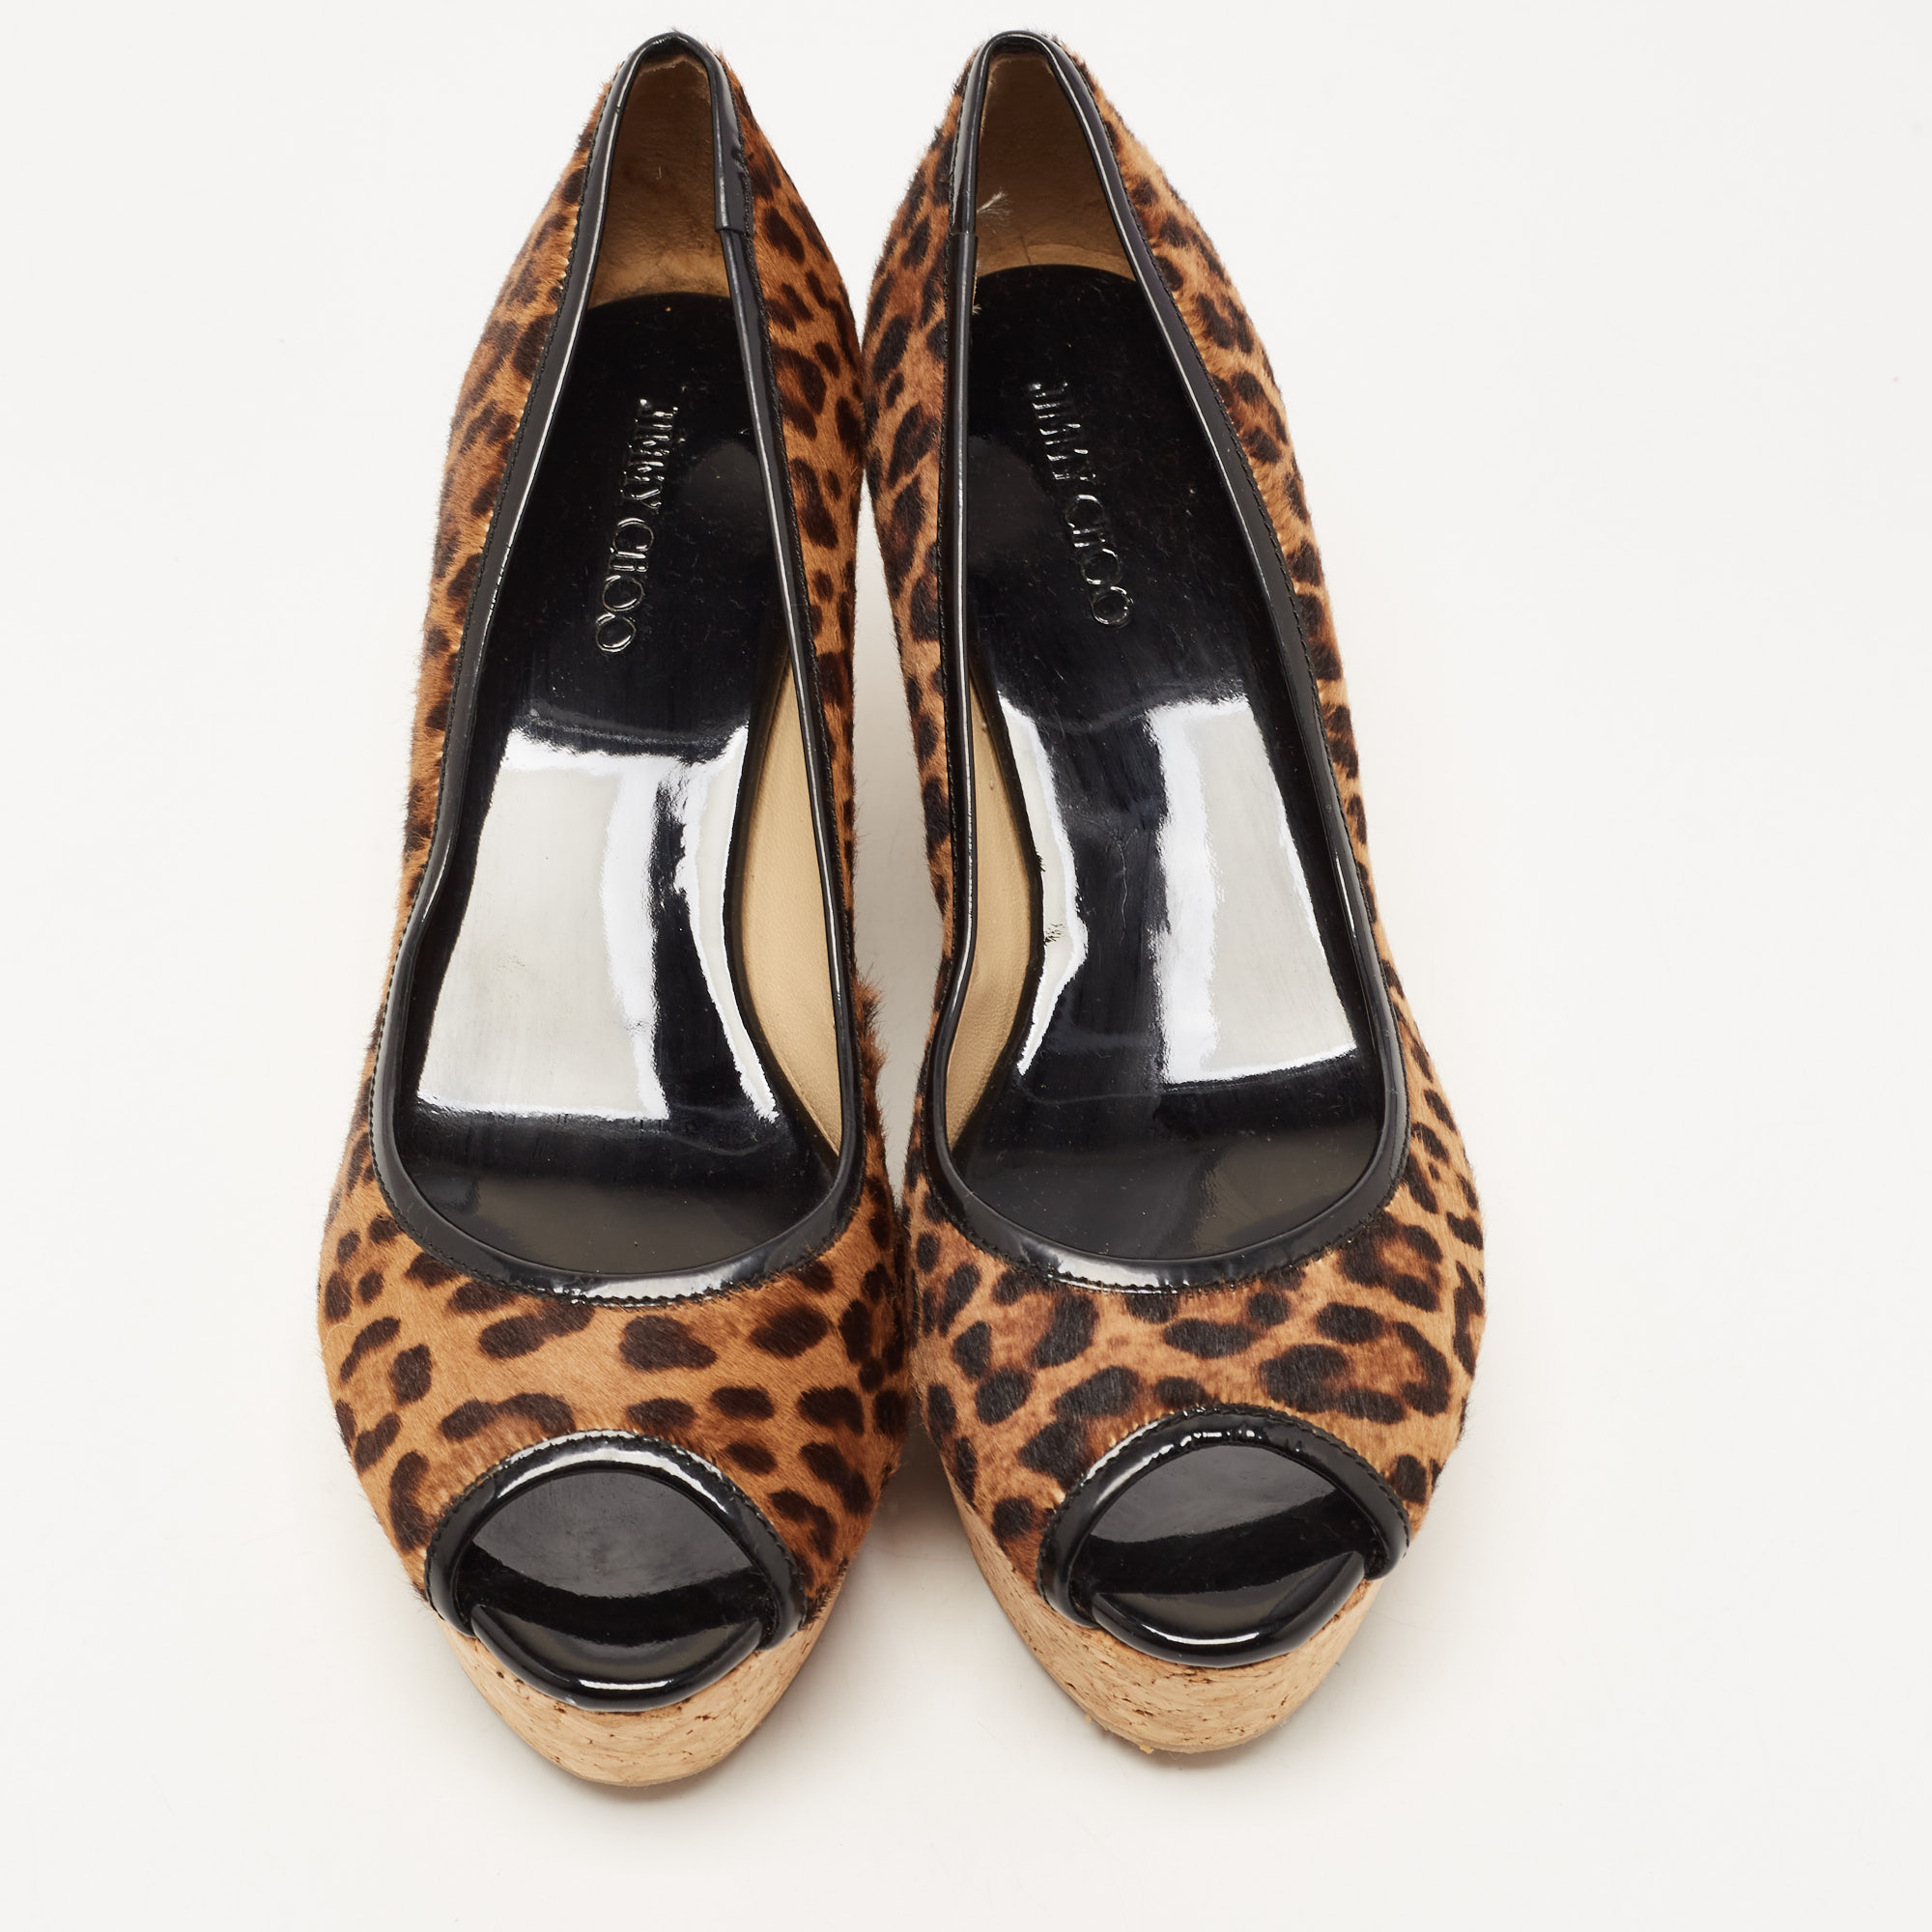 Jimmy Choo Leopard Print Calf Hair And Patent Trim Papina Cork Wedge Pumps Size 38